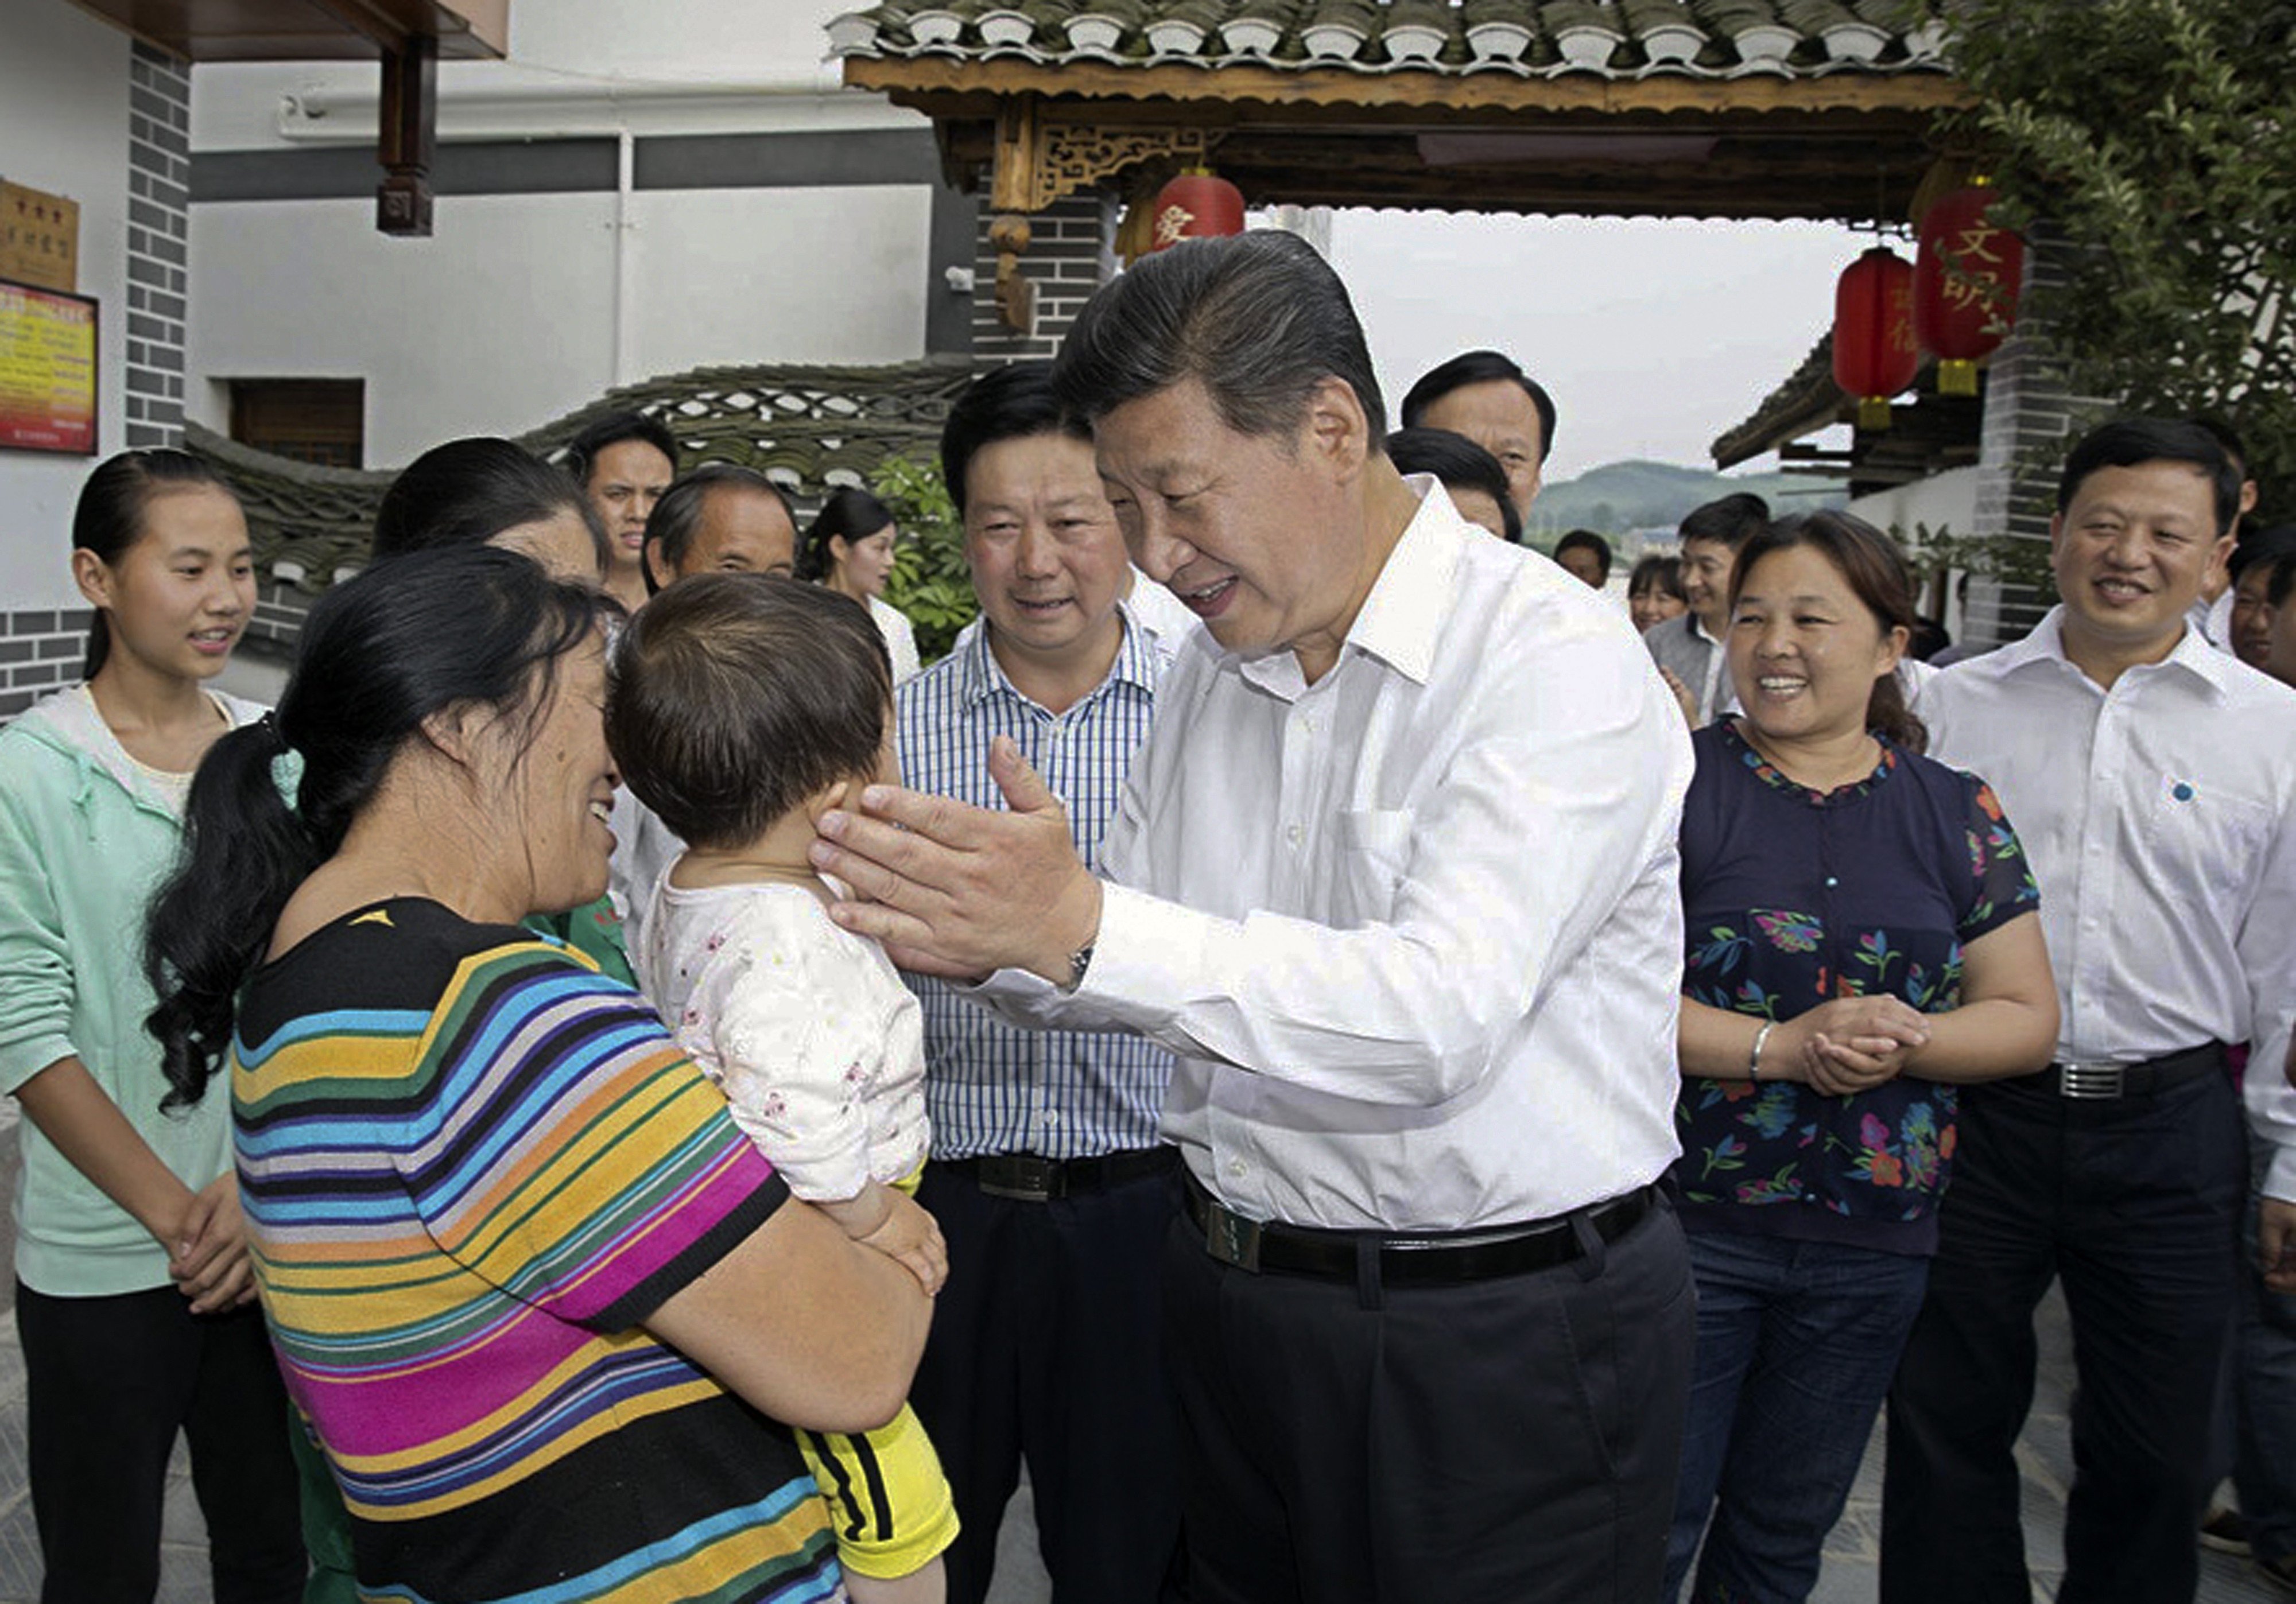 Xi Jinping meets members of the public during a tour of Guizhou. He attended this month’s Communist Party congress in Beijing as a delegate from the province even though he has never worked there. Photo: Handout